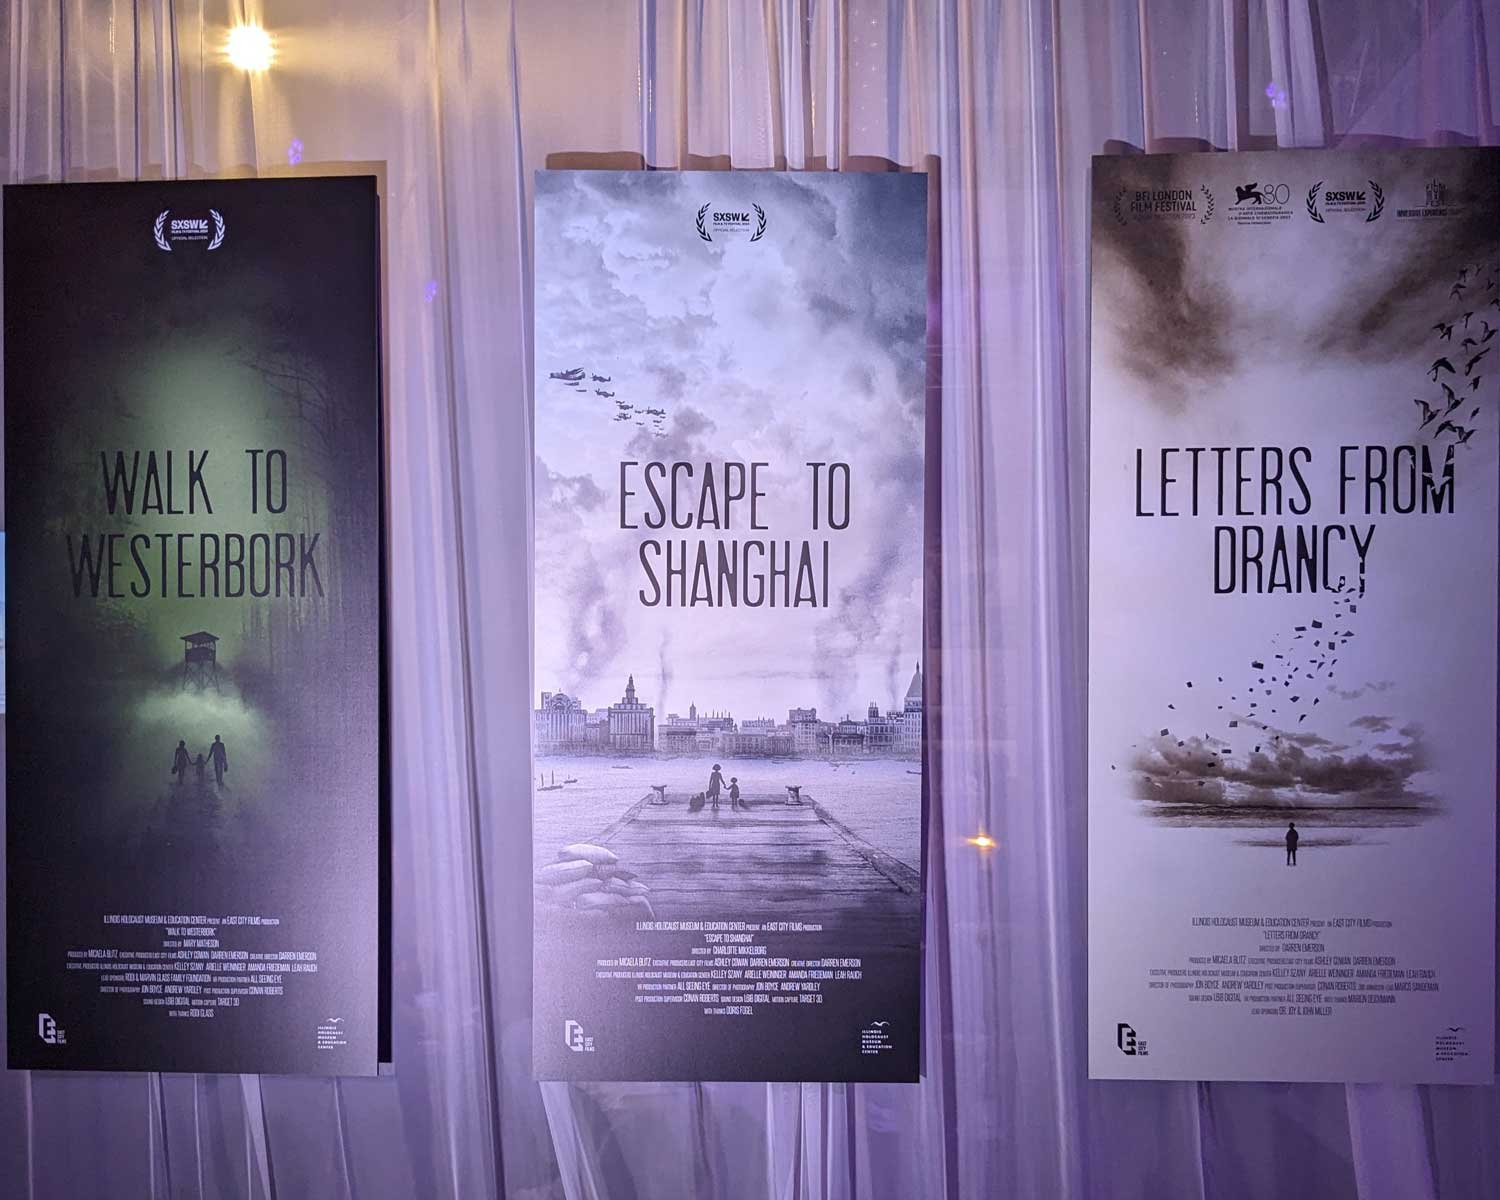 The 3 posters